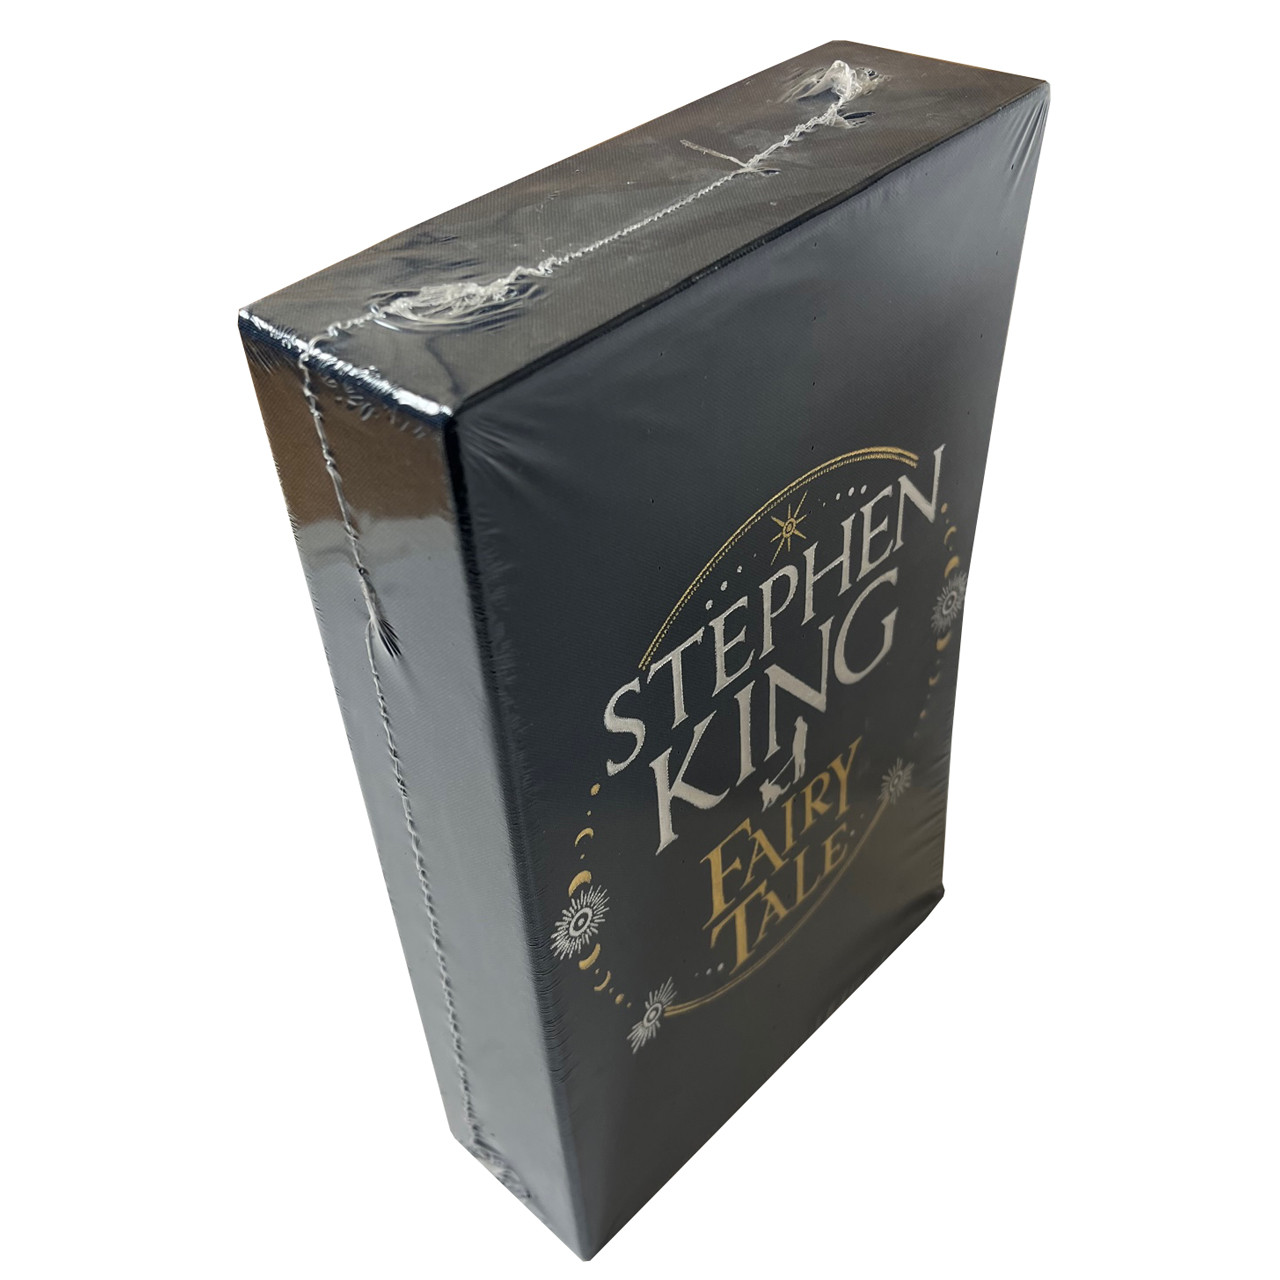 Stephen King "Fairy Tale" Slipcased Signed Limited Deluxe Edition of 200 [Sealed]